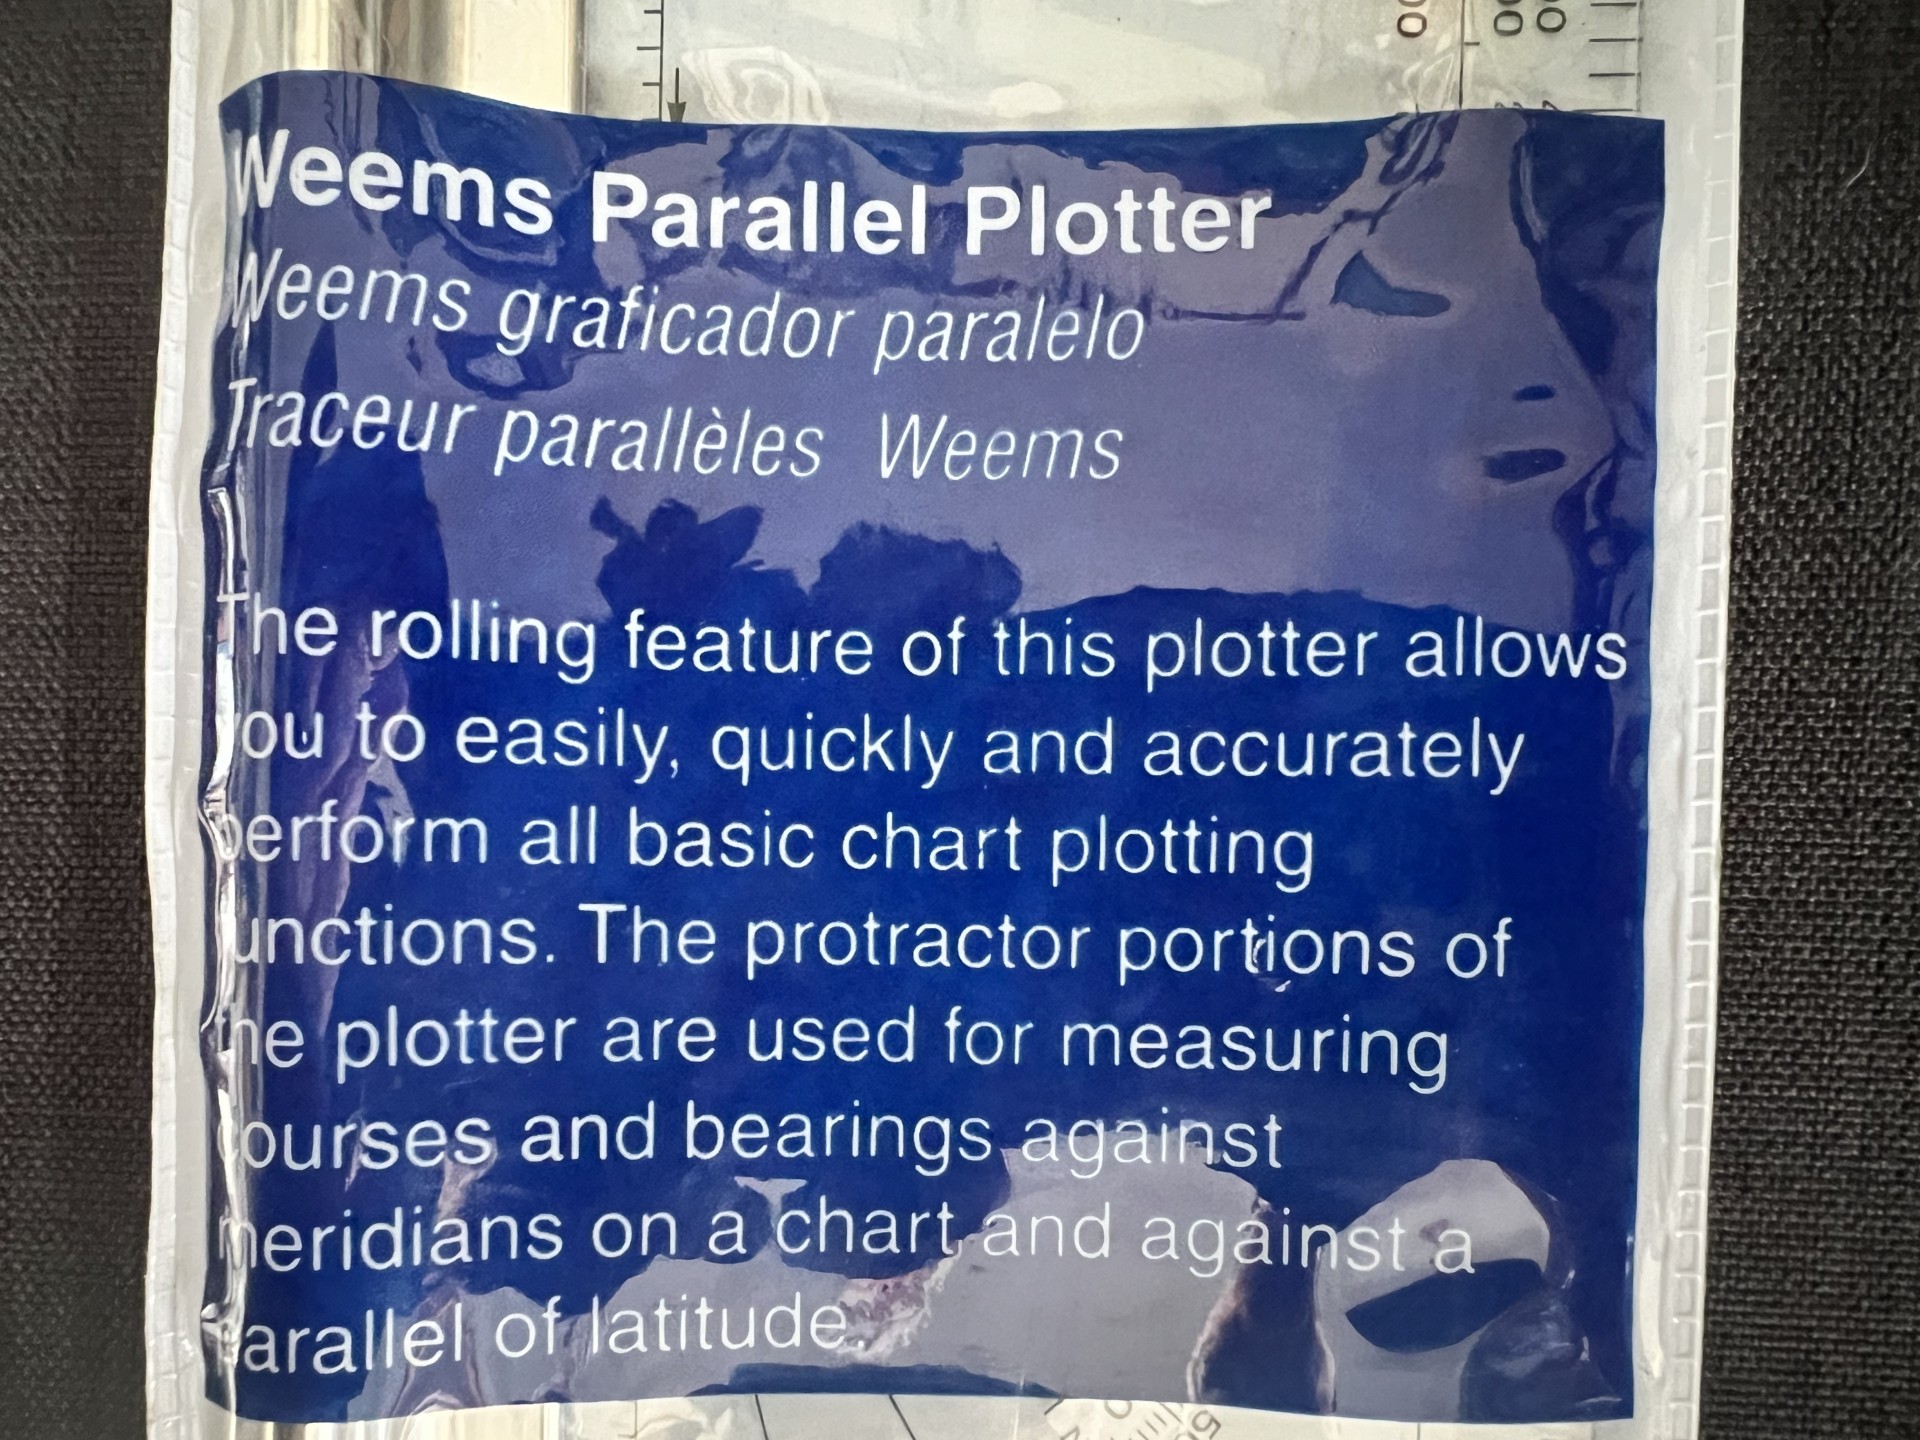 Instructions for Weems Parallel Plotter.